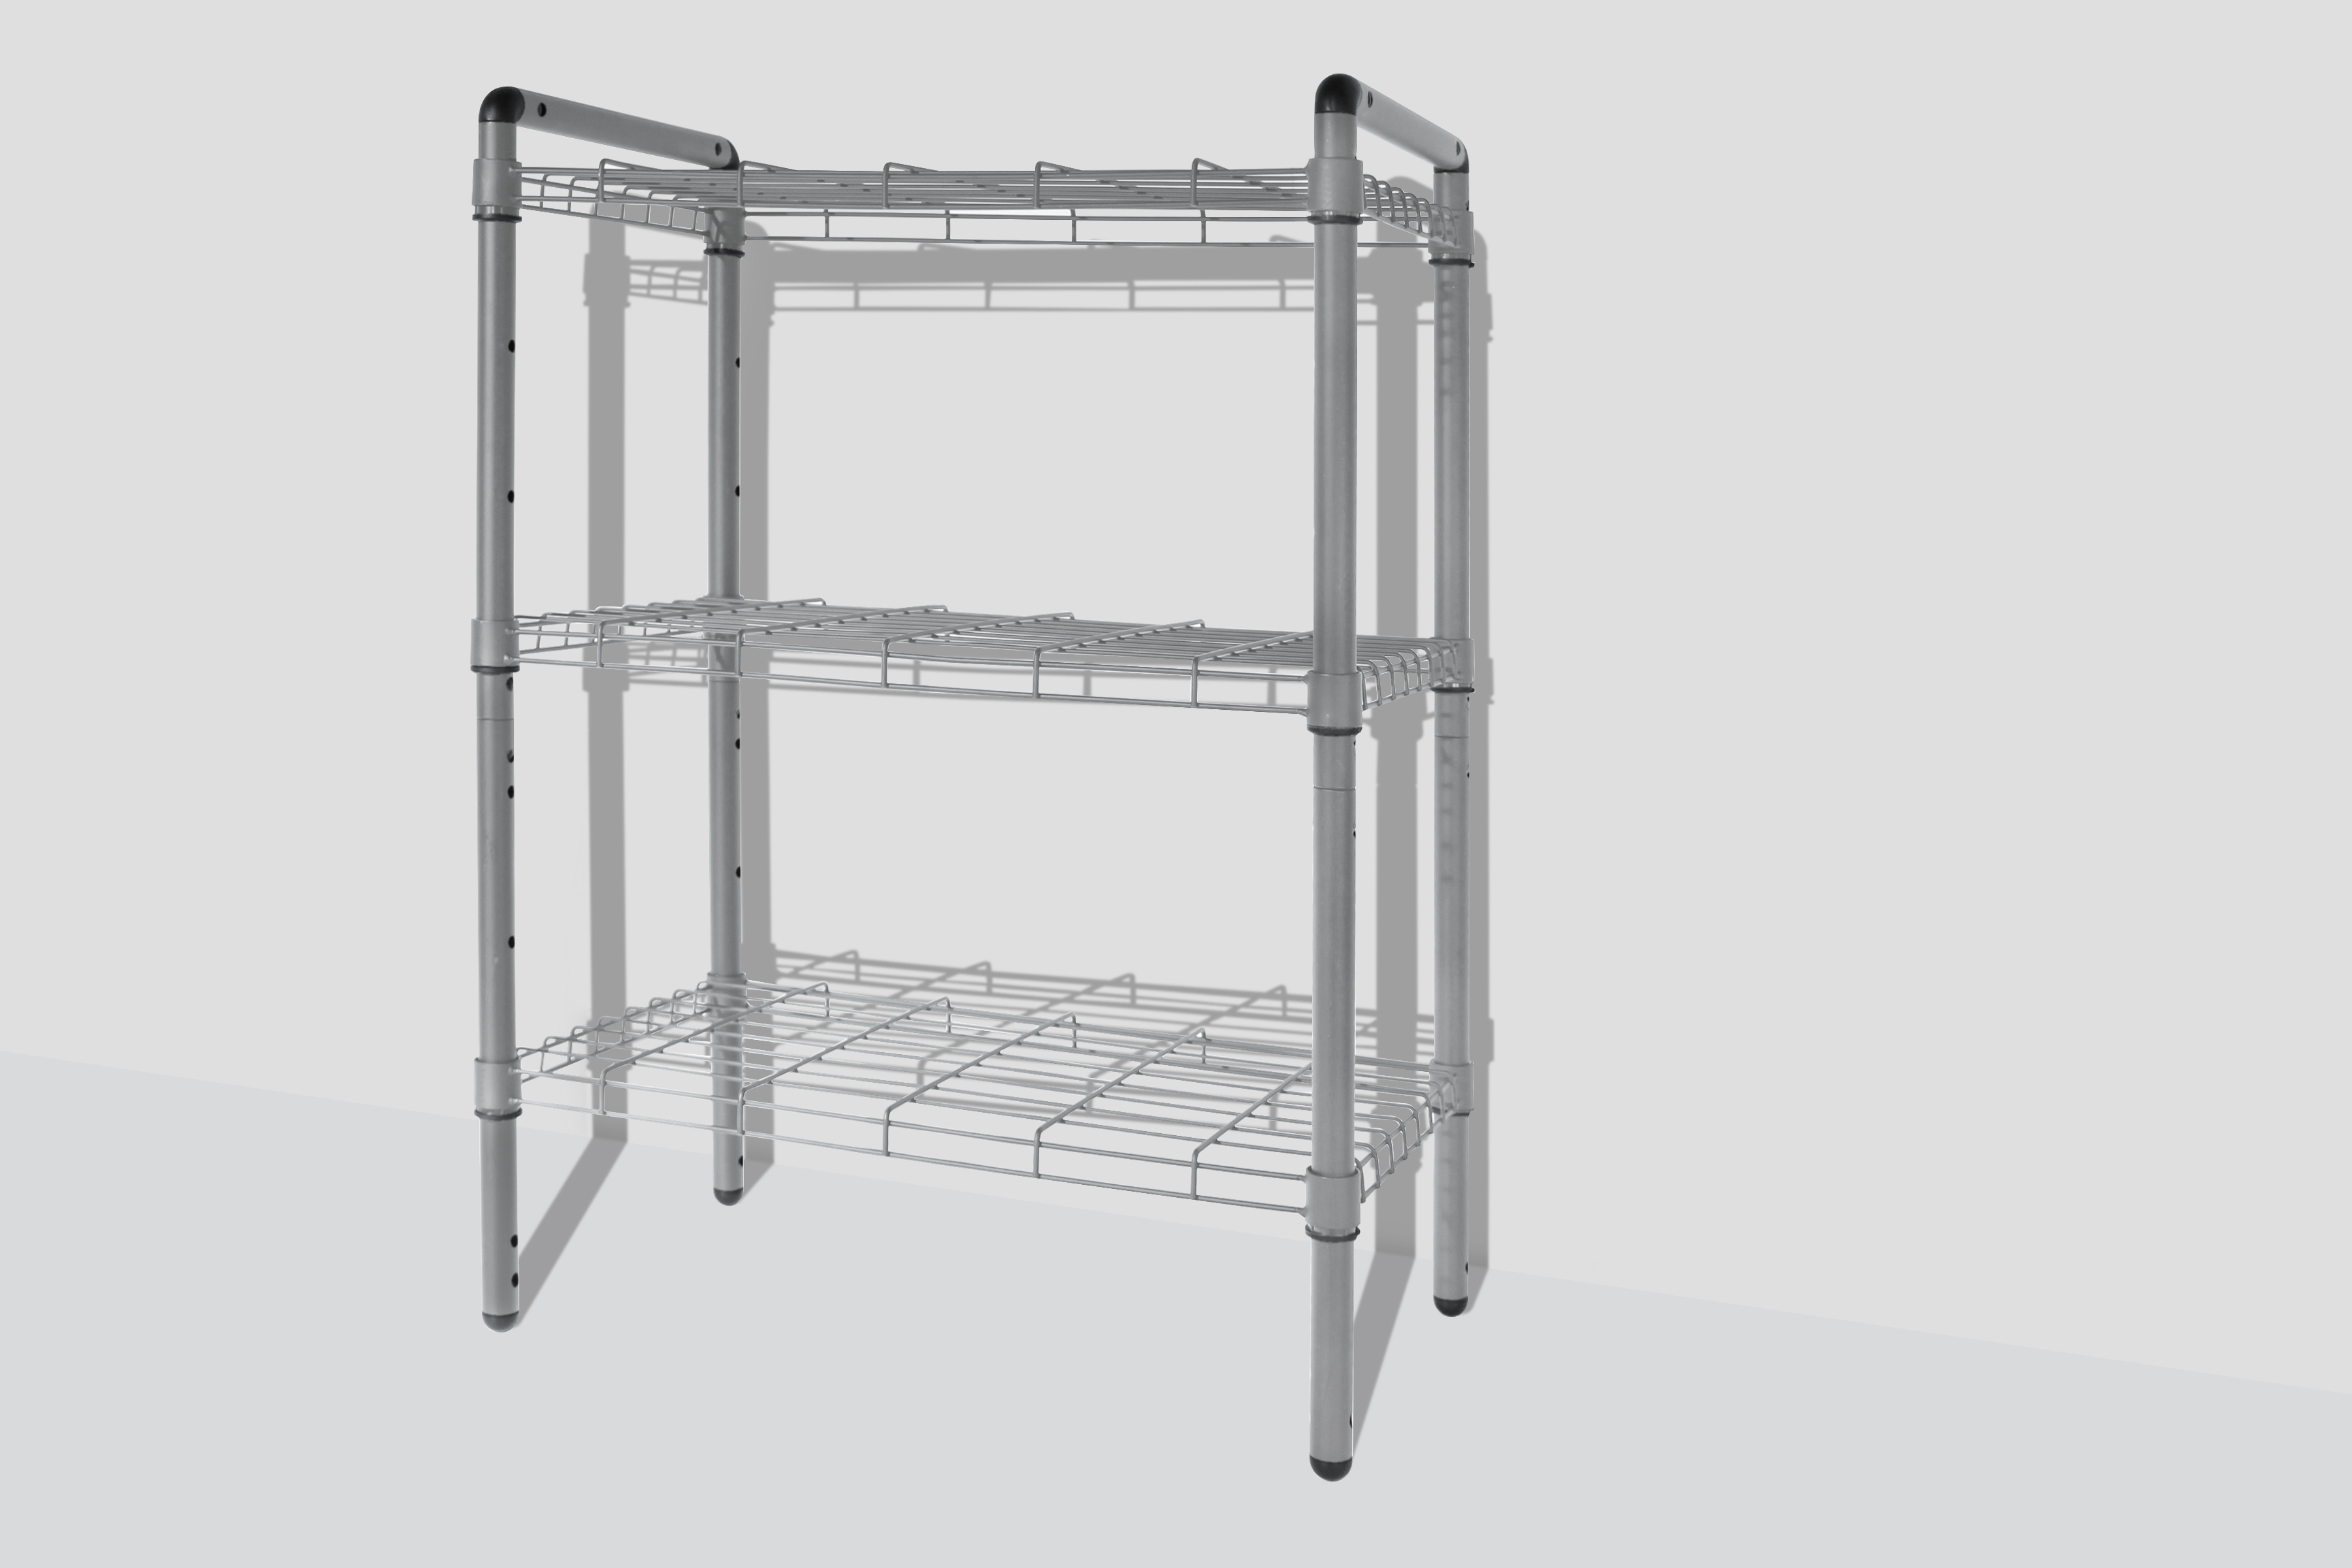 The Art of Storage Quick Rack 3-Tier Wire Shelving Storage Garage or Bathroom Silver, 100lbs per shelf - image 1 of 2